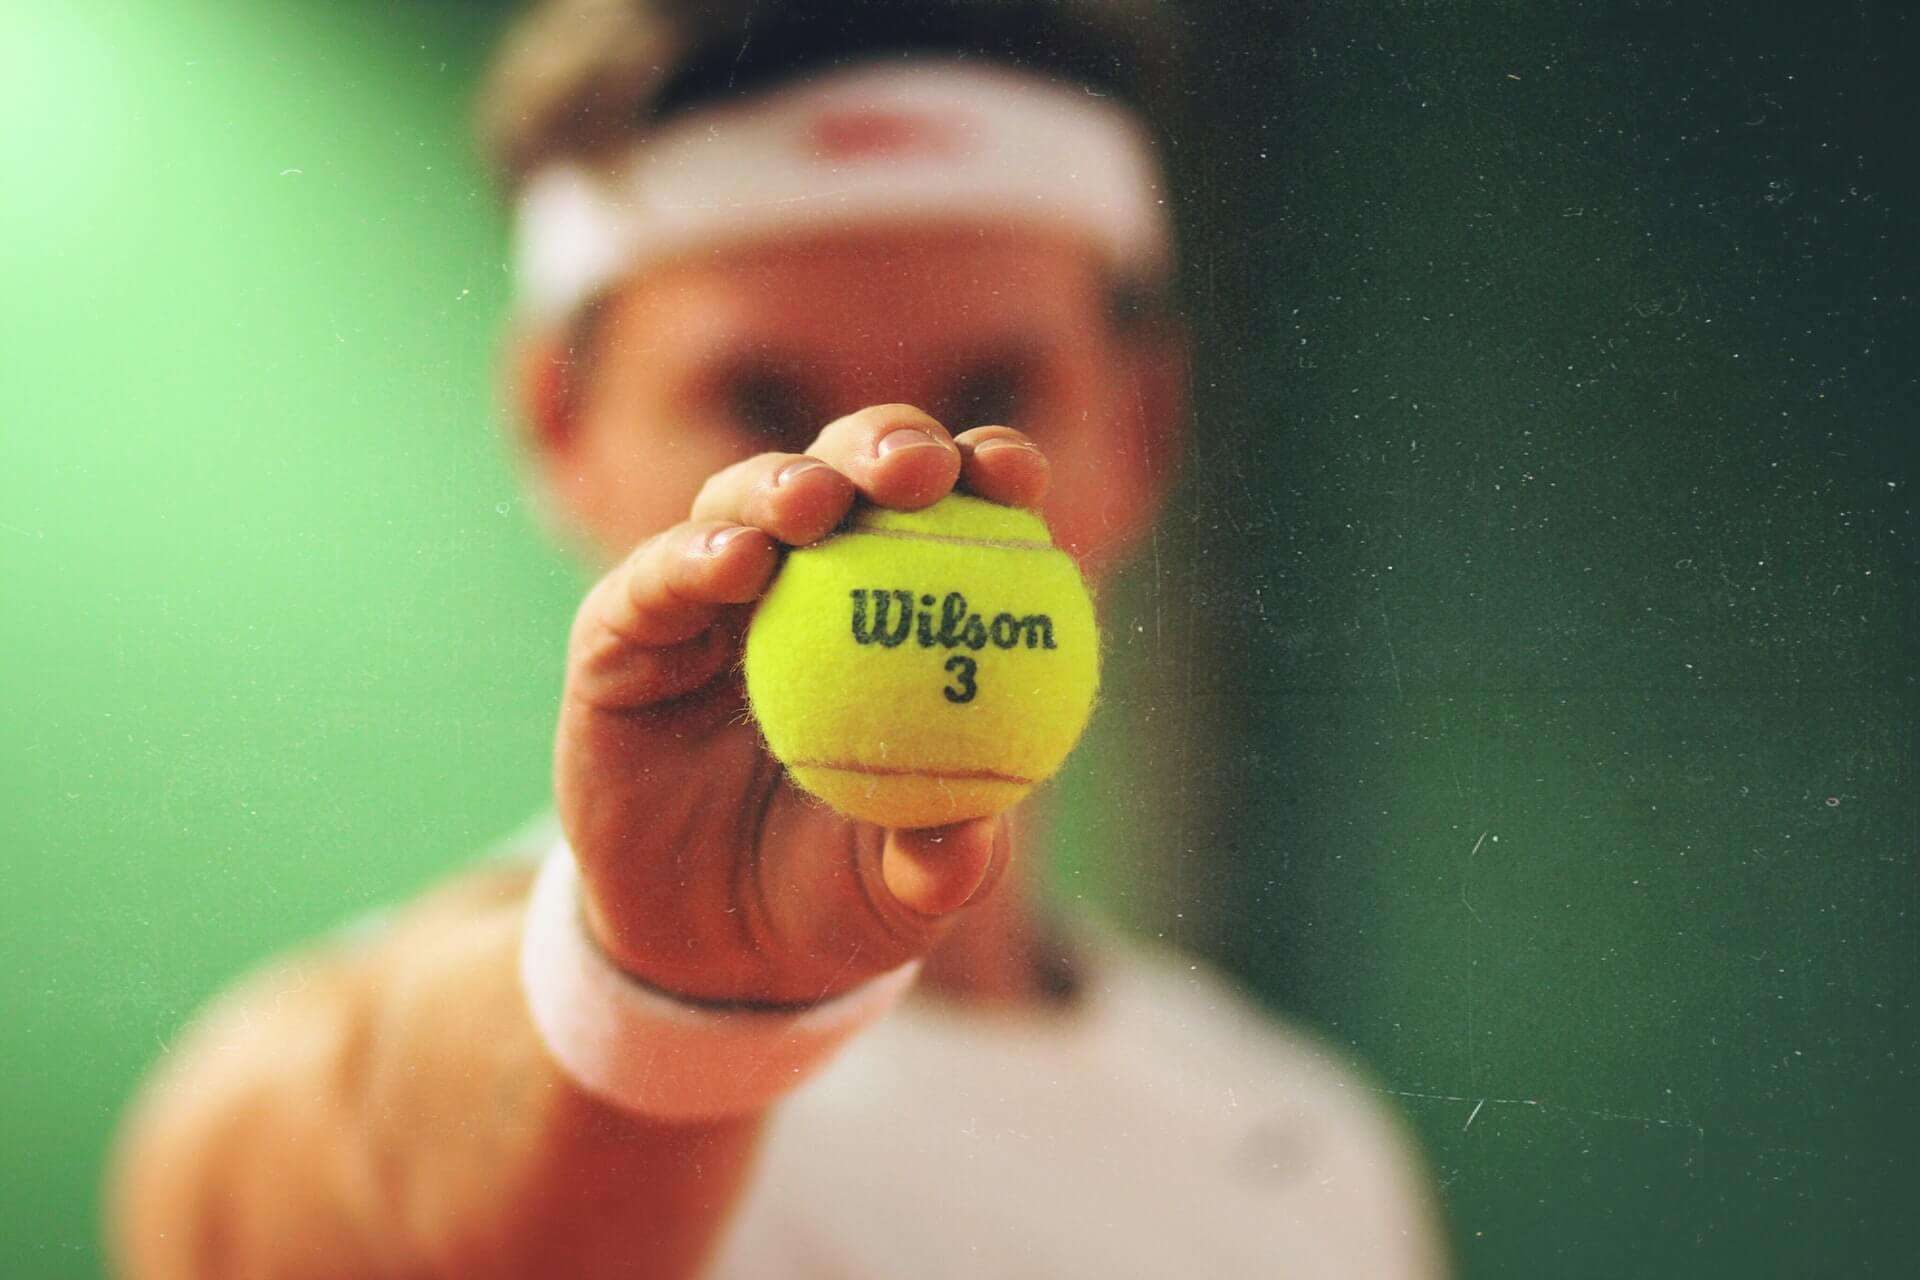 How to Get Sponsored by Wilson Tennis